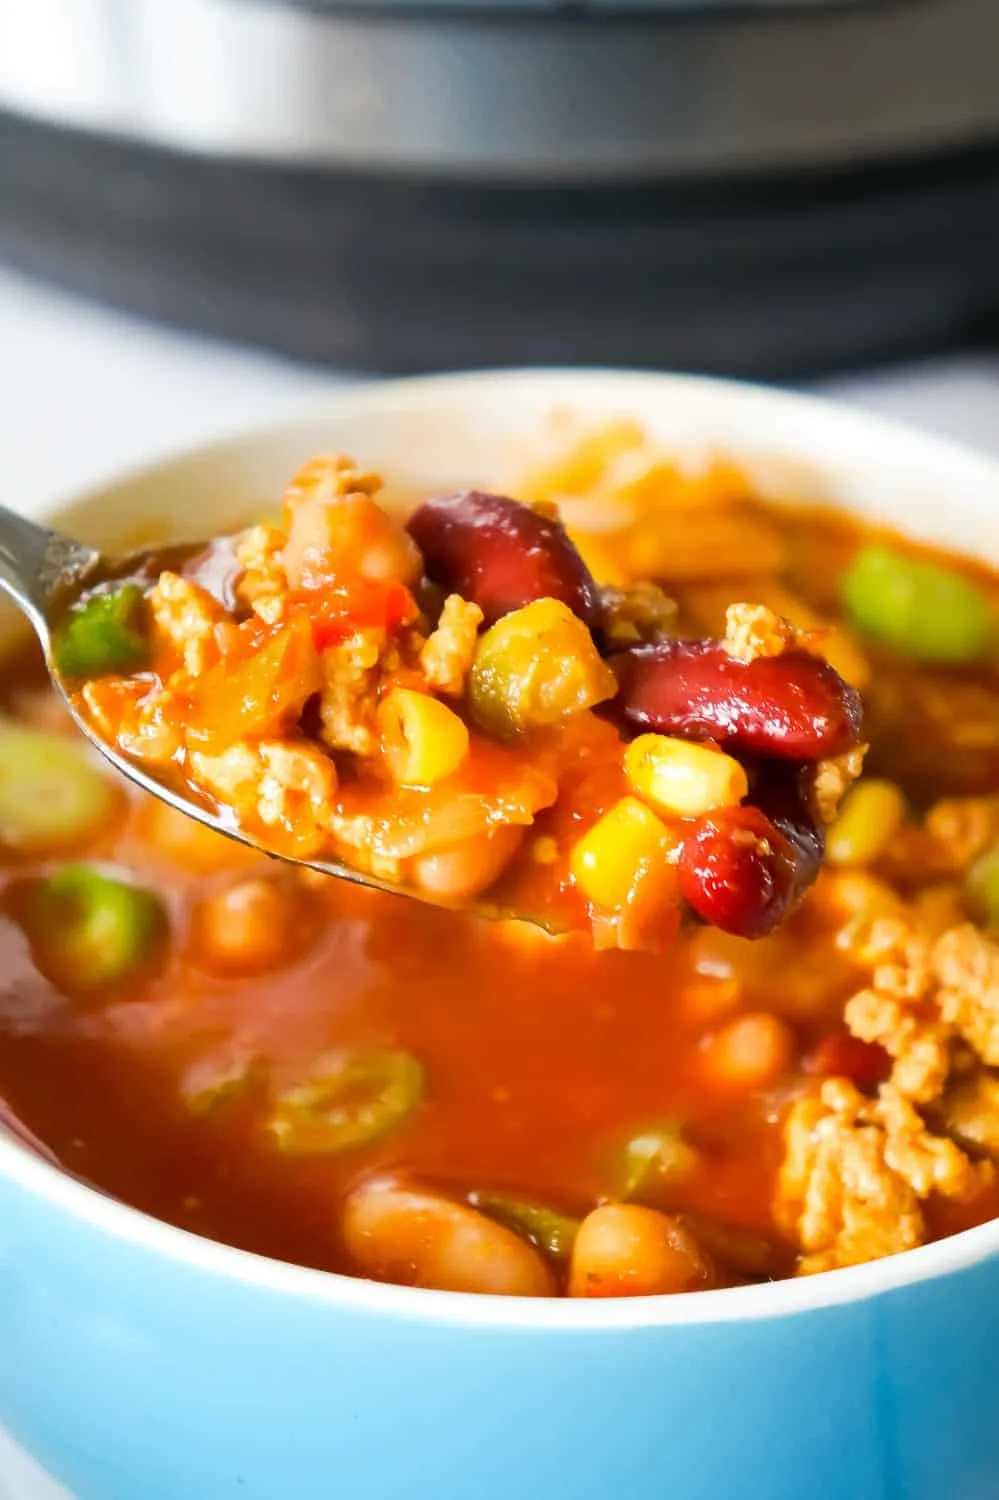 Instant Pot Turkey Chili is an easy pressure cooker chili recipe using ground turkey, chunky salsa, chili sauce, mixed beans and taco seasoning.